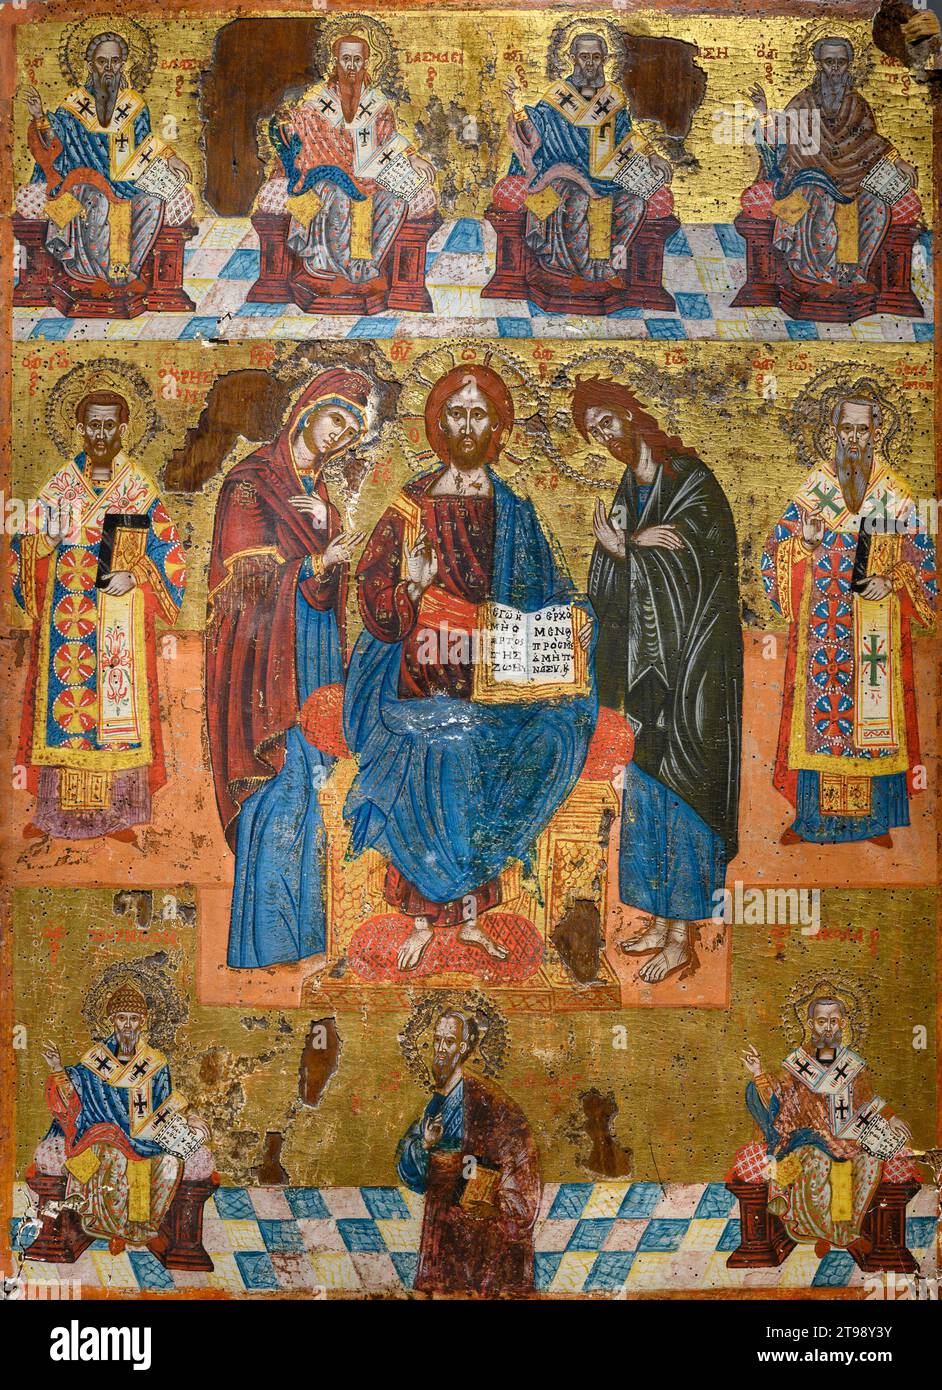 Deesis with Saints. 17th century, by an unknown painter from Crete. The Žitomislić Monastery, Bosnia and Herzegovina. Stock Photo